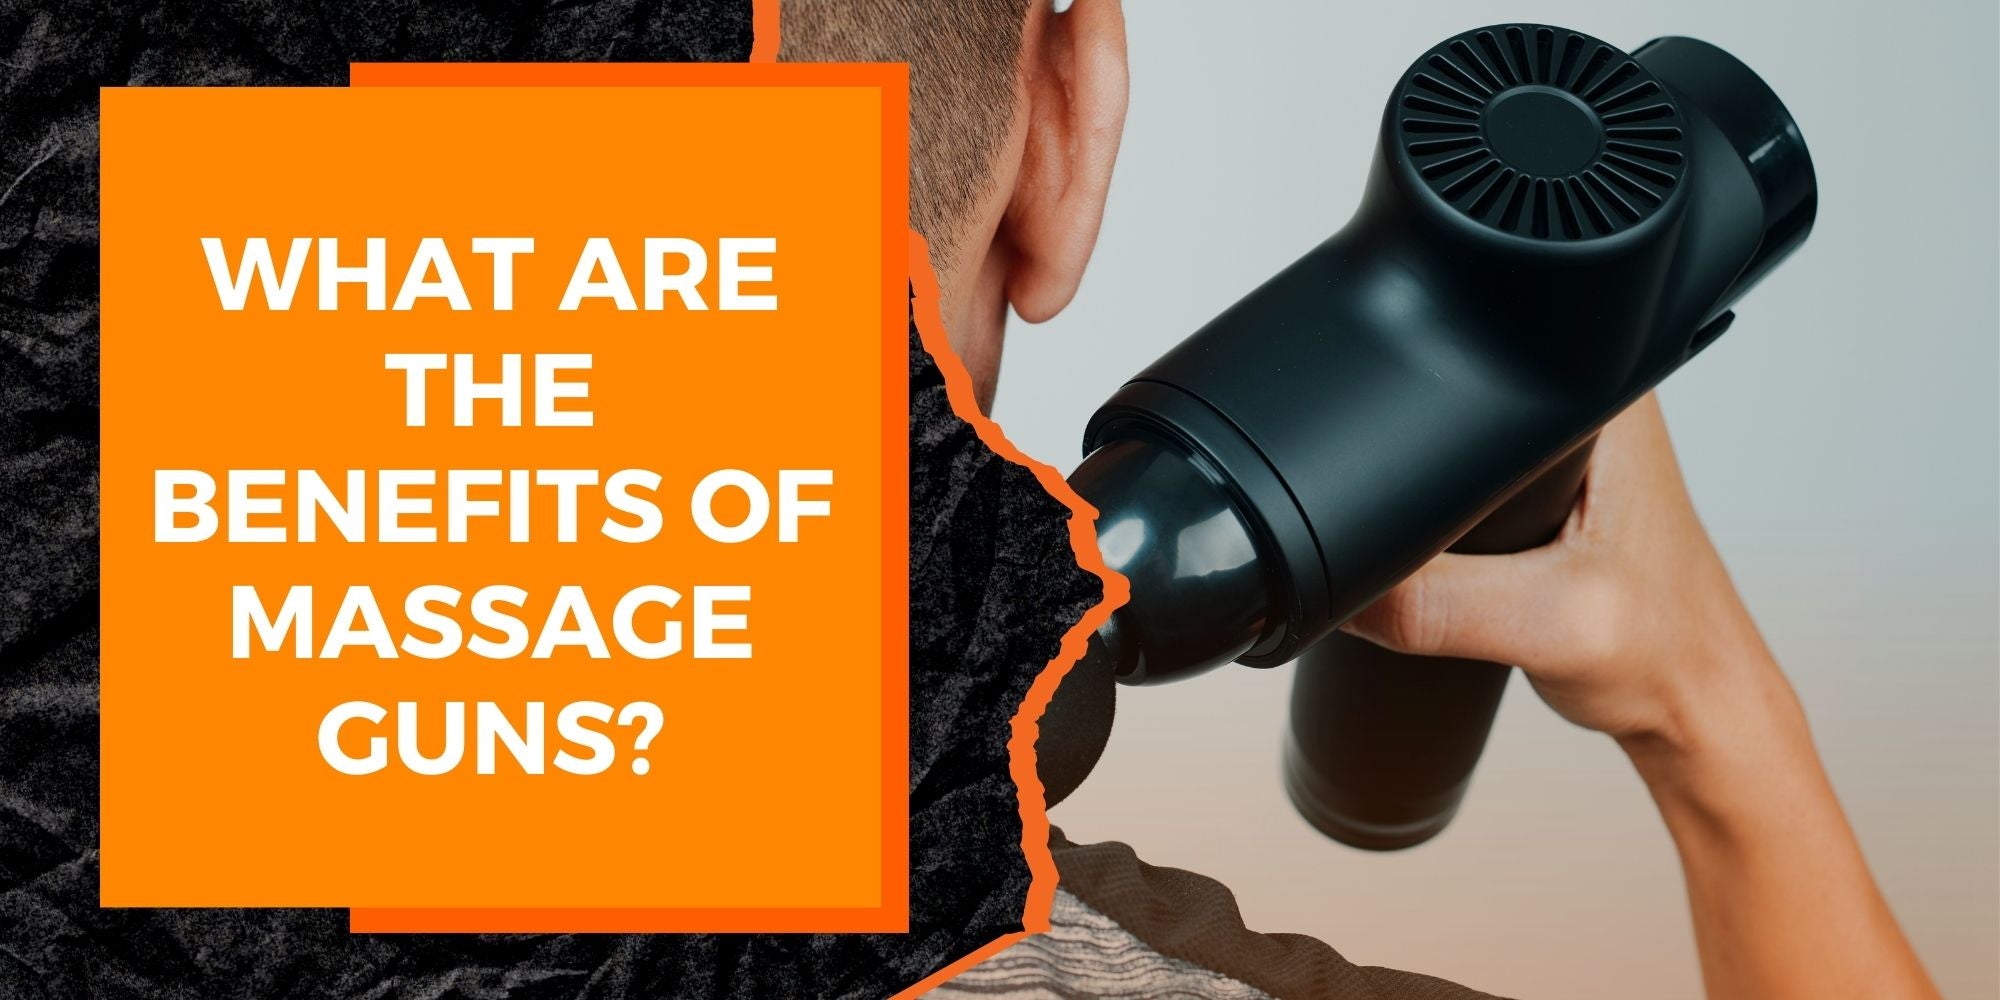 What Are the Benefits of Massage Guns?